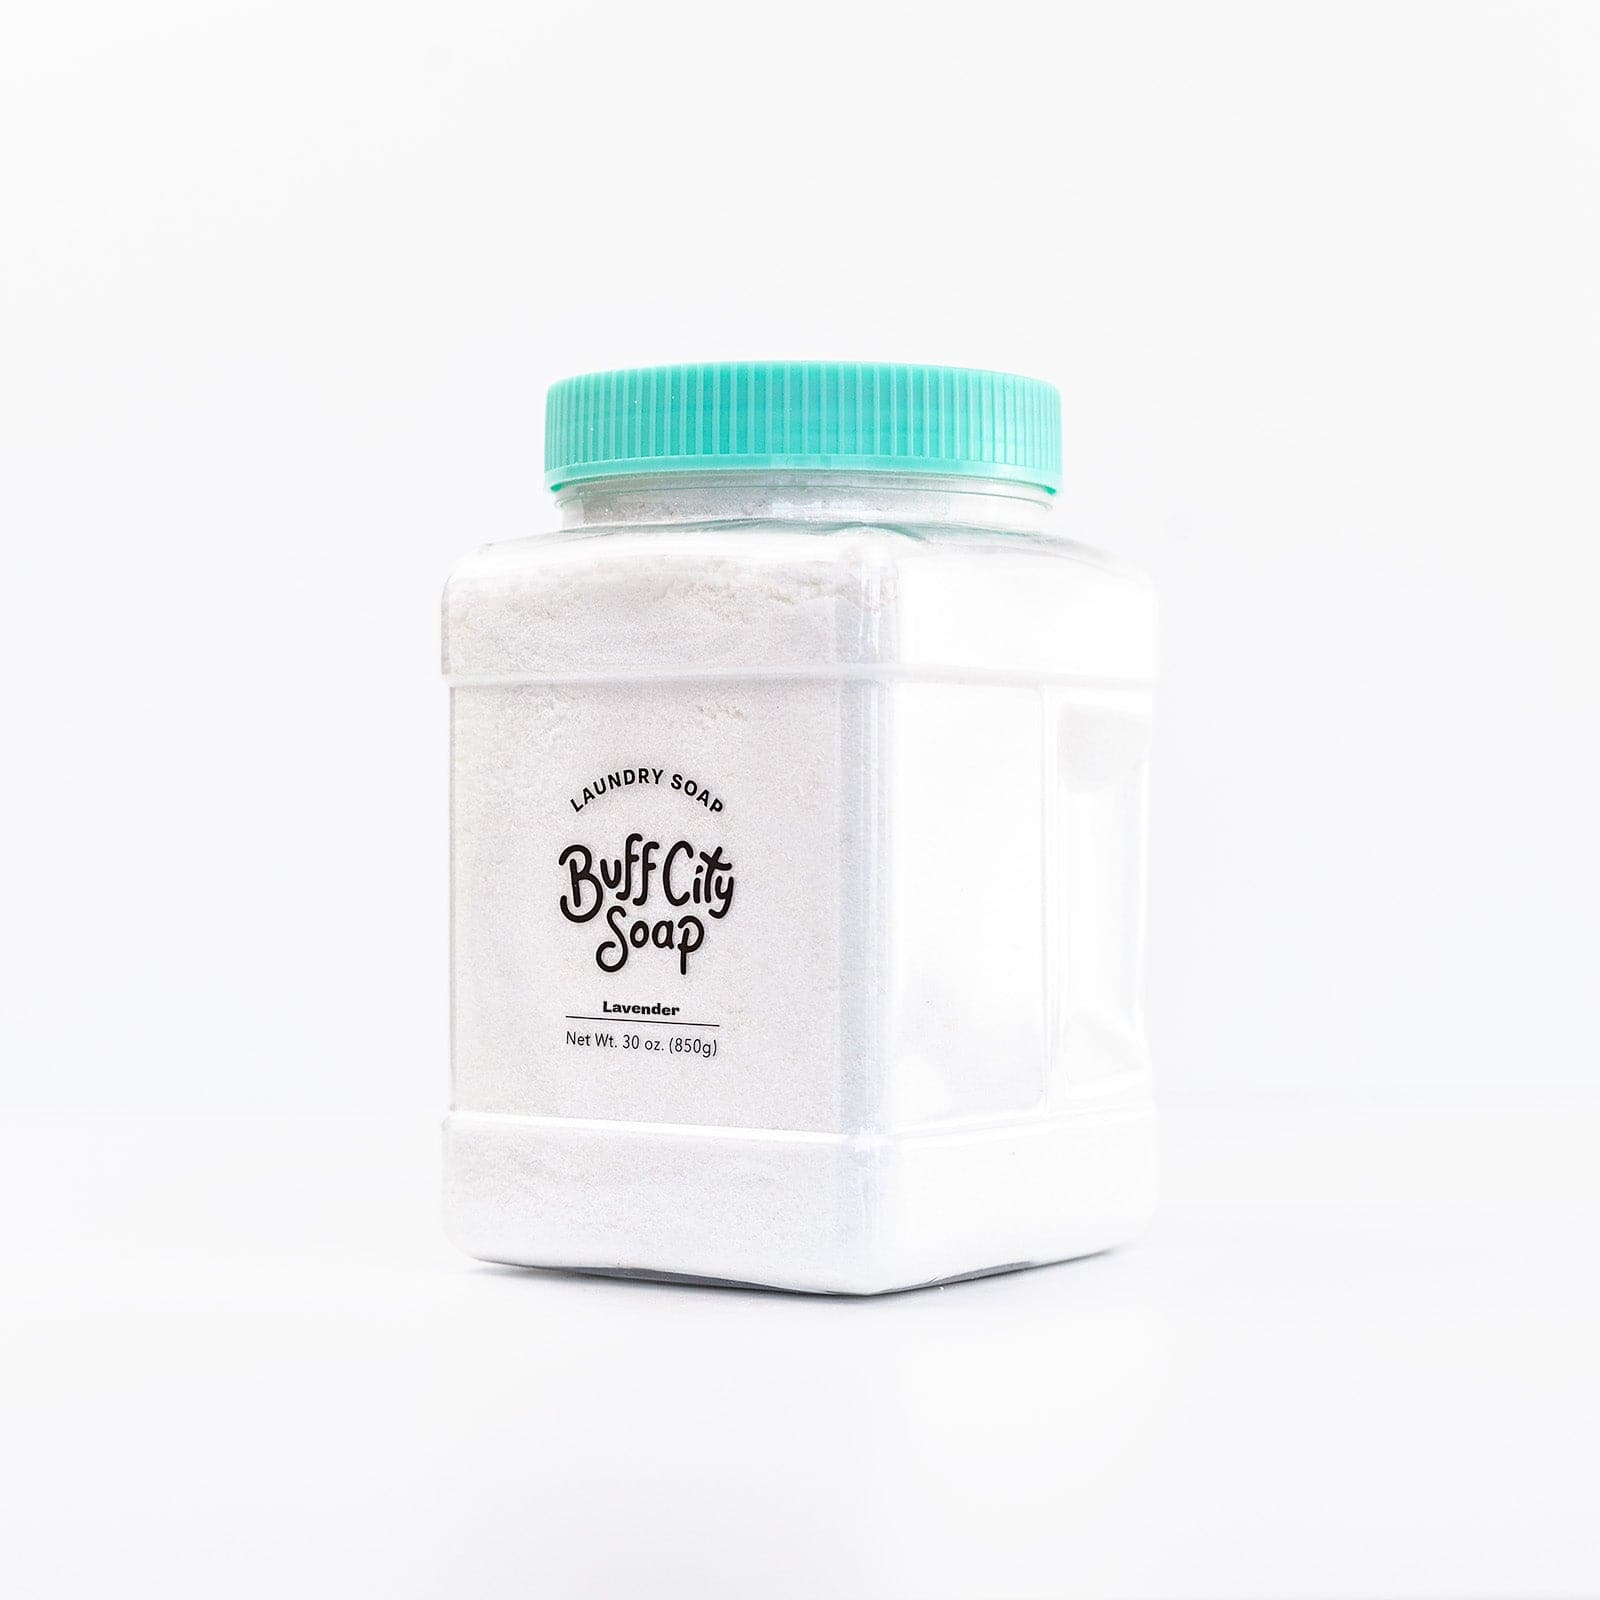 Clear plastic container of Buff City Soap's lavender scented laundry soap with a teal lid 